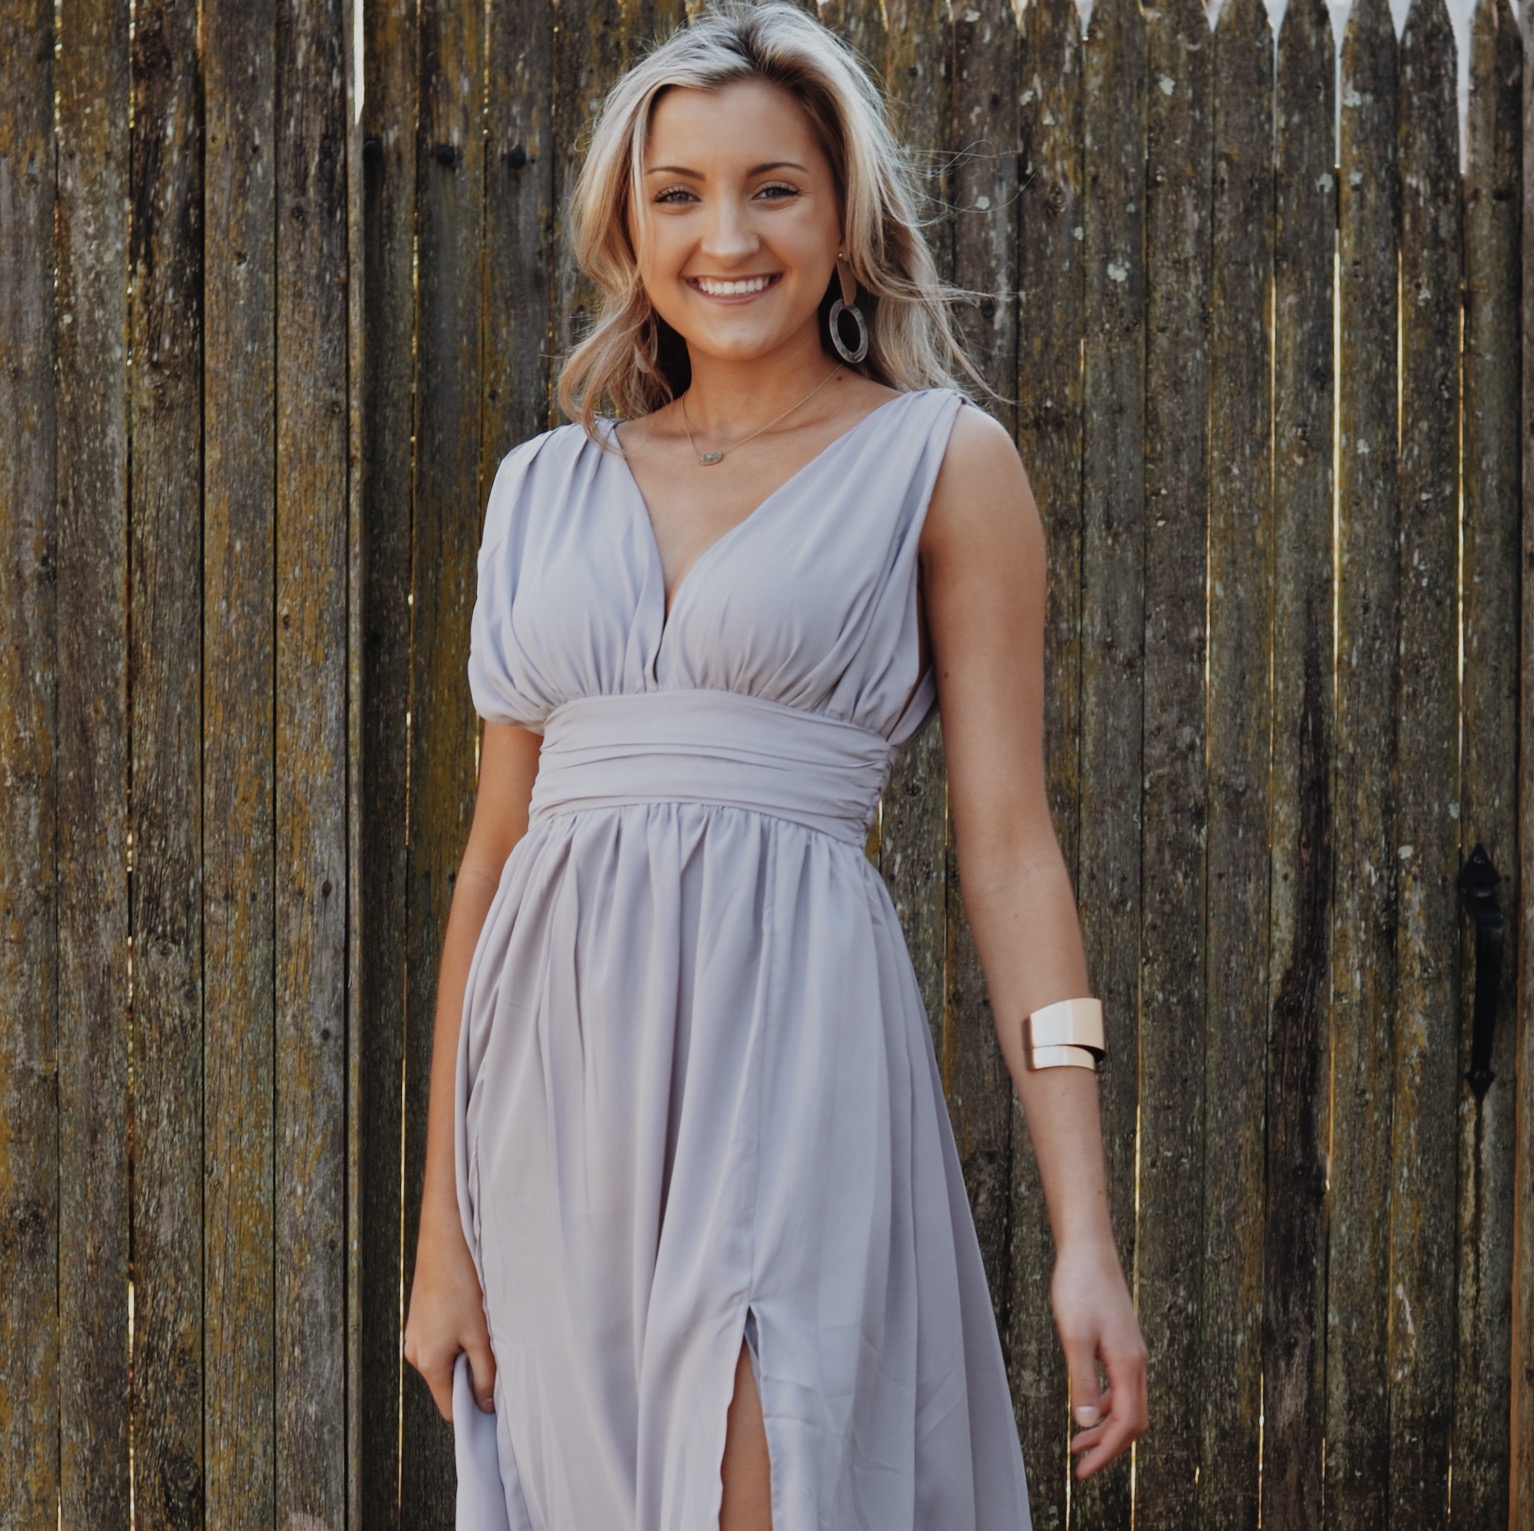 Prom Season With SheIn $30 Dresses